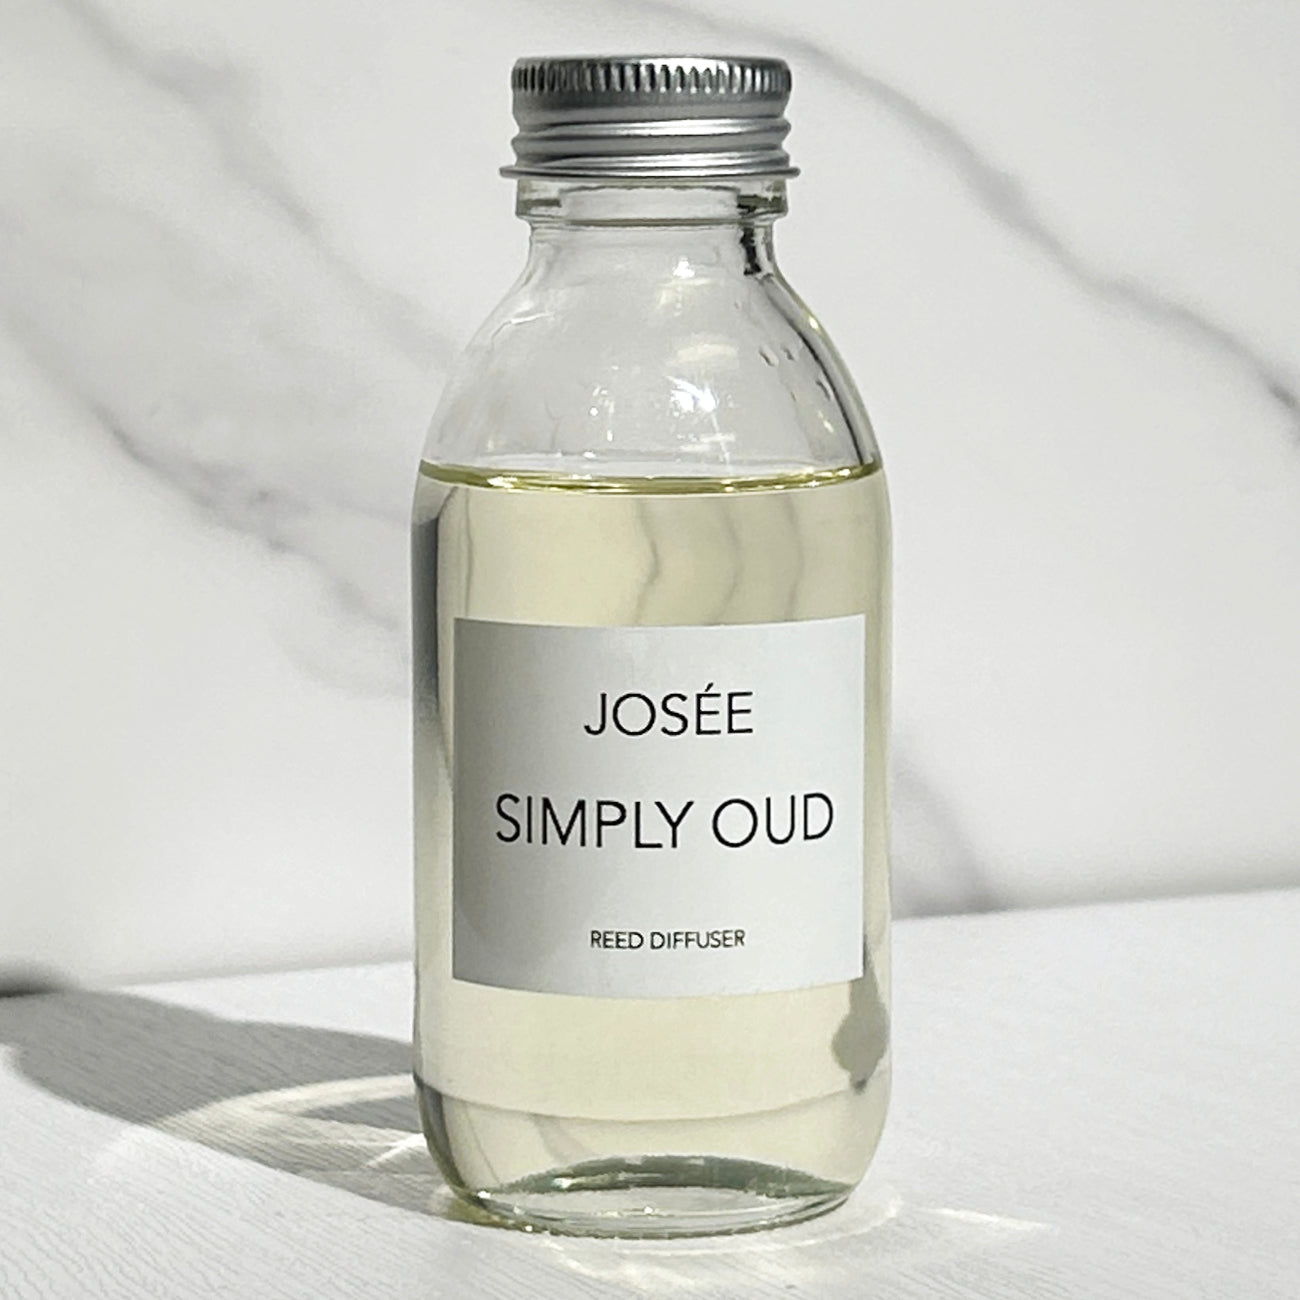 Simply Oud Reed Diffuser